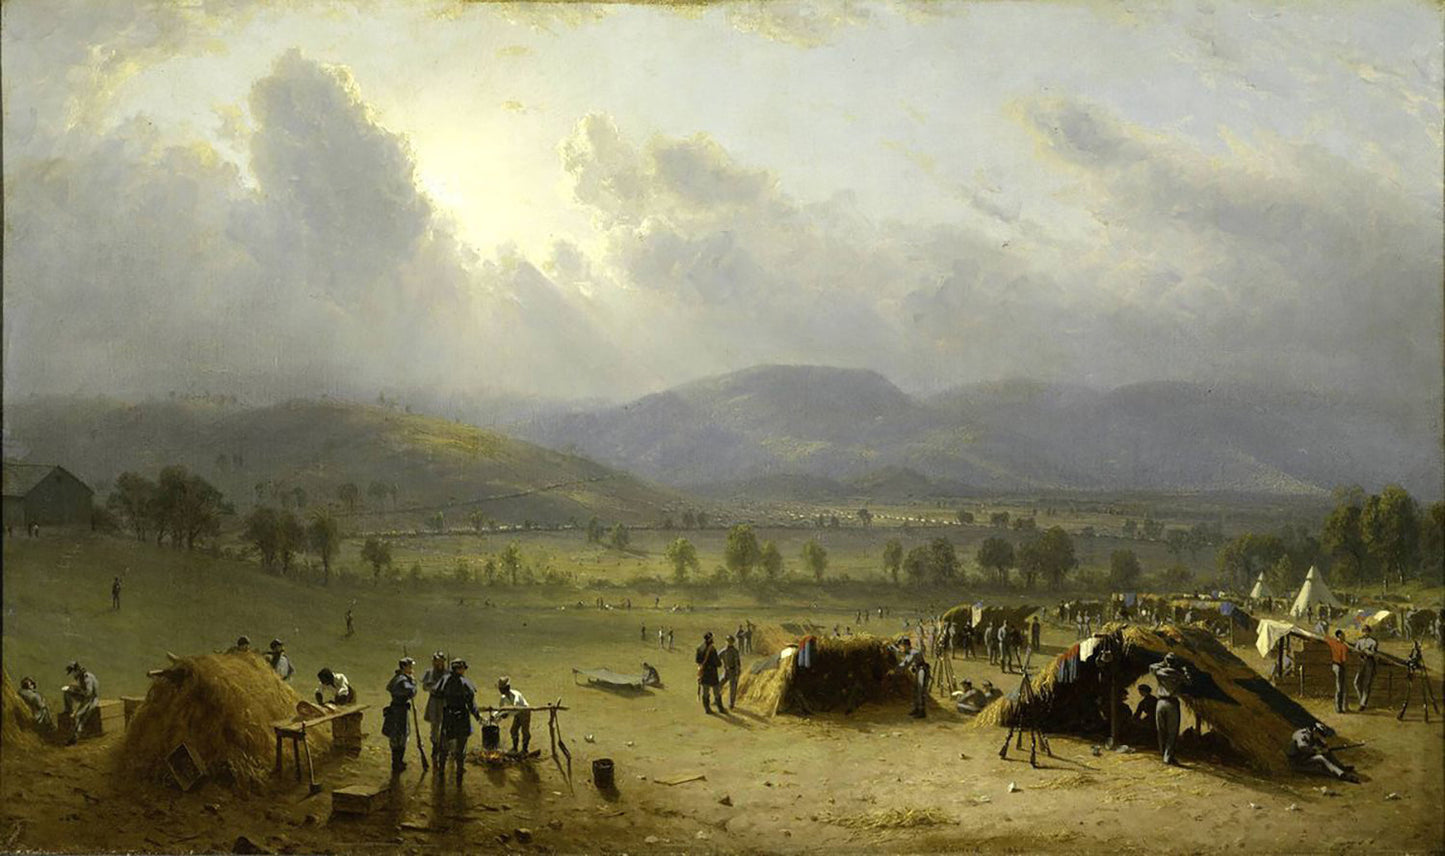 Camp of the Seventh Regiment, near Frederick, Maryland, in July 1863 by Sanford Robinson Gifford Art Print